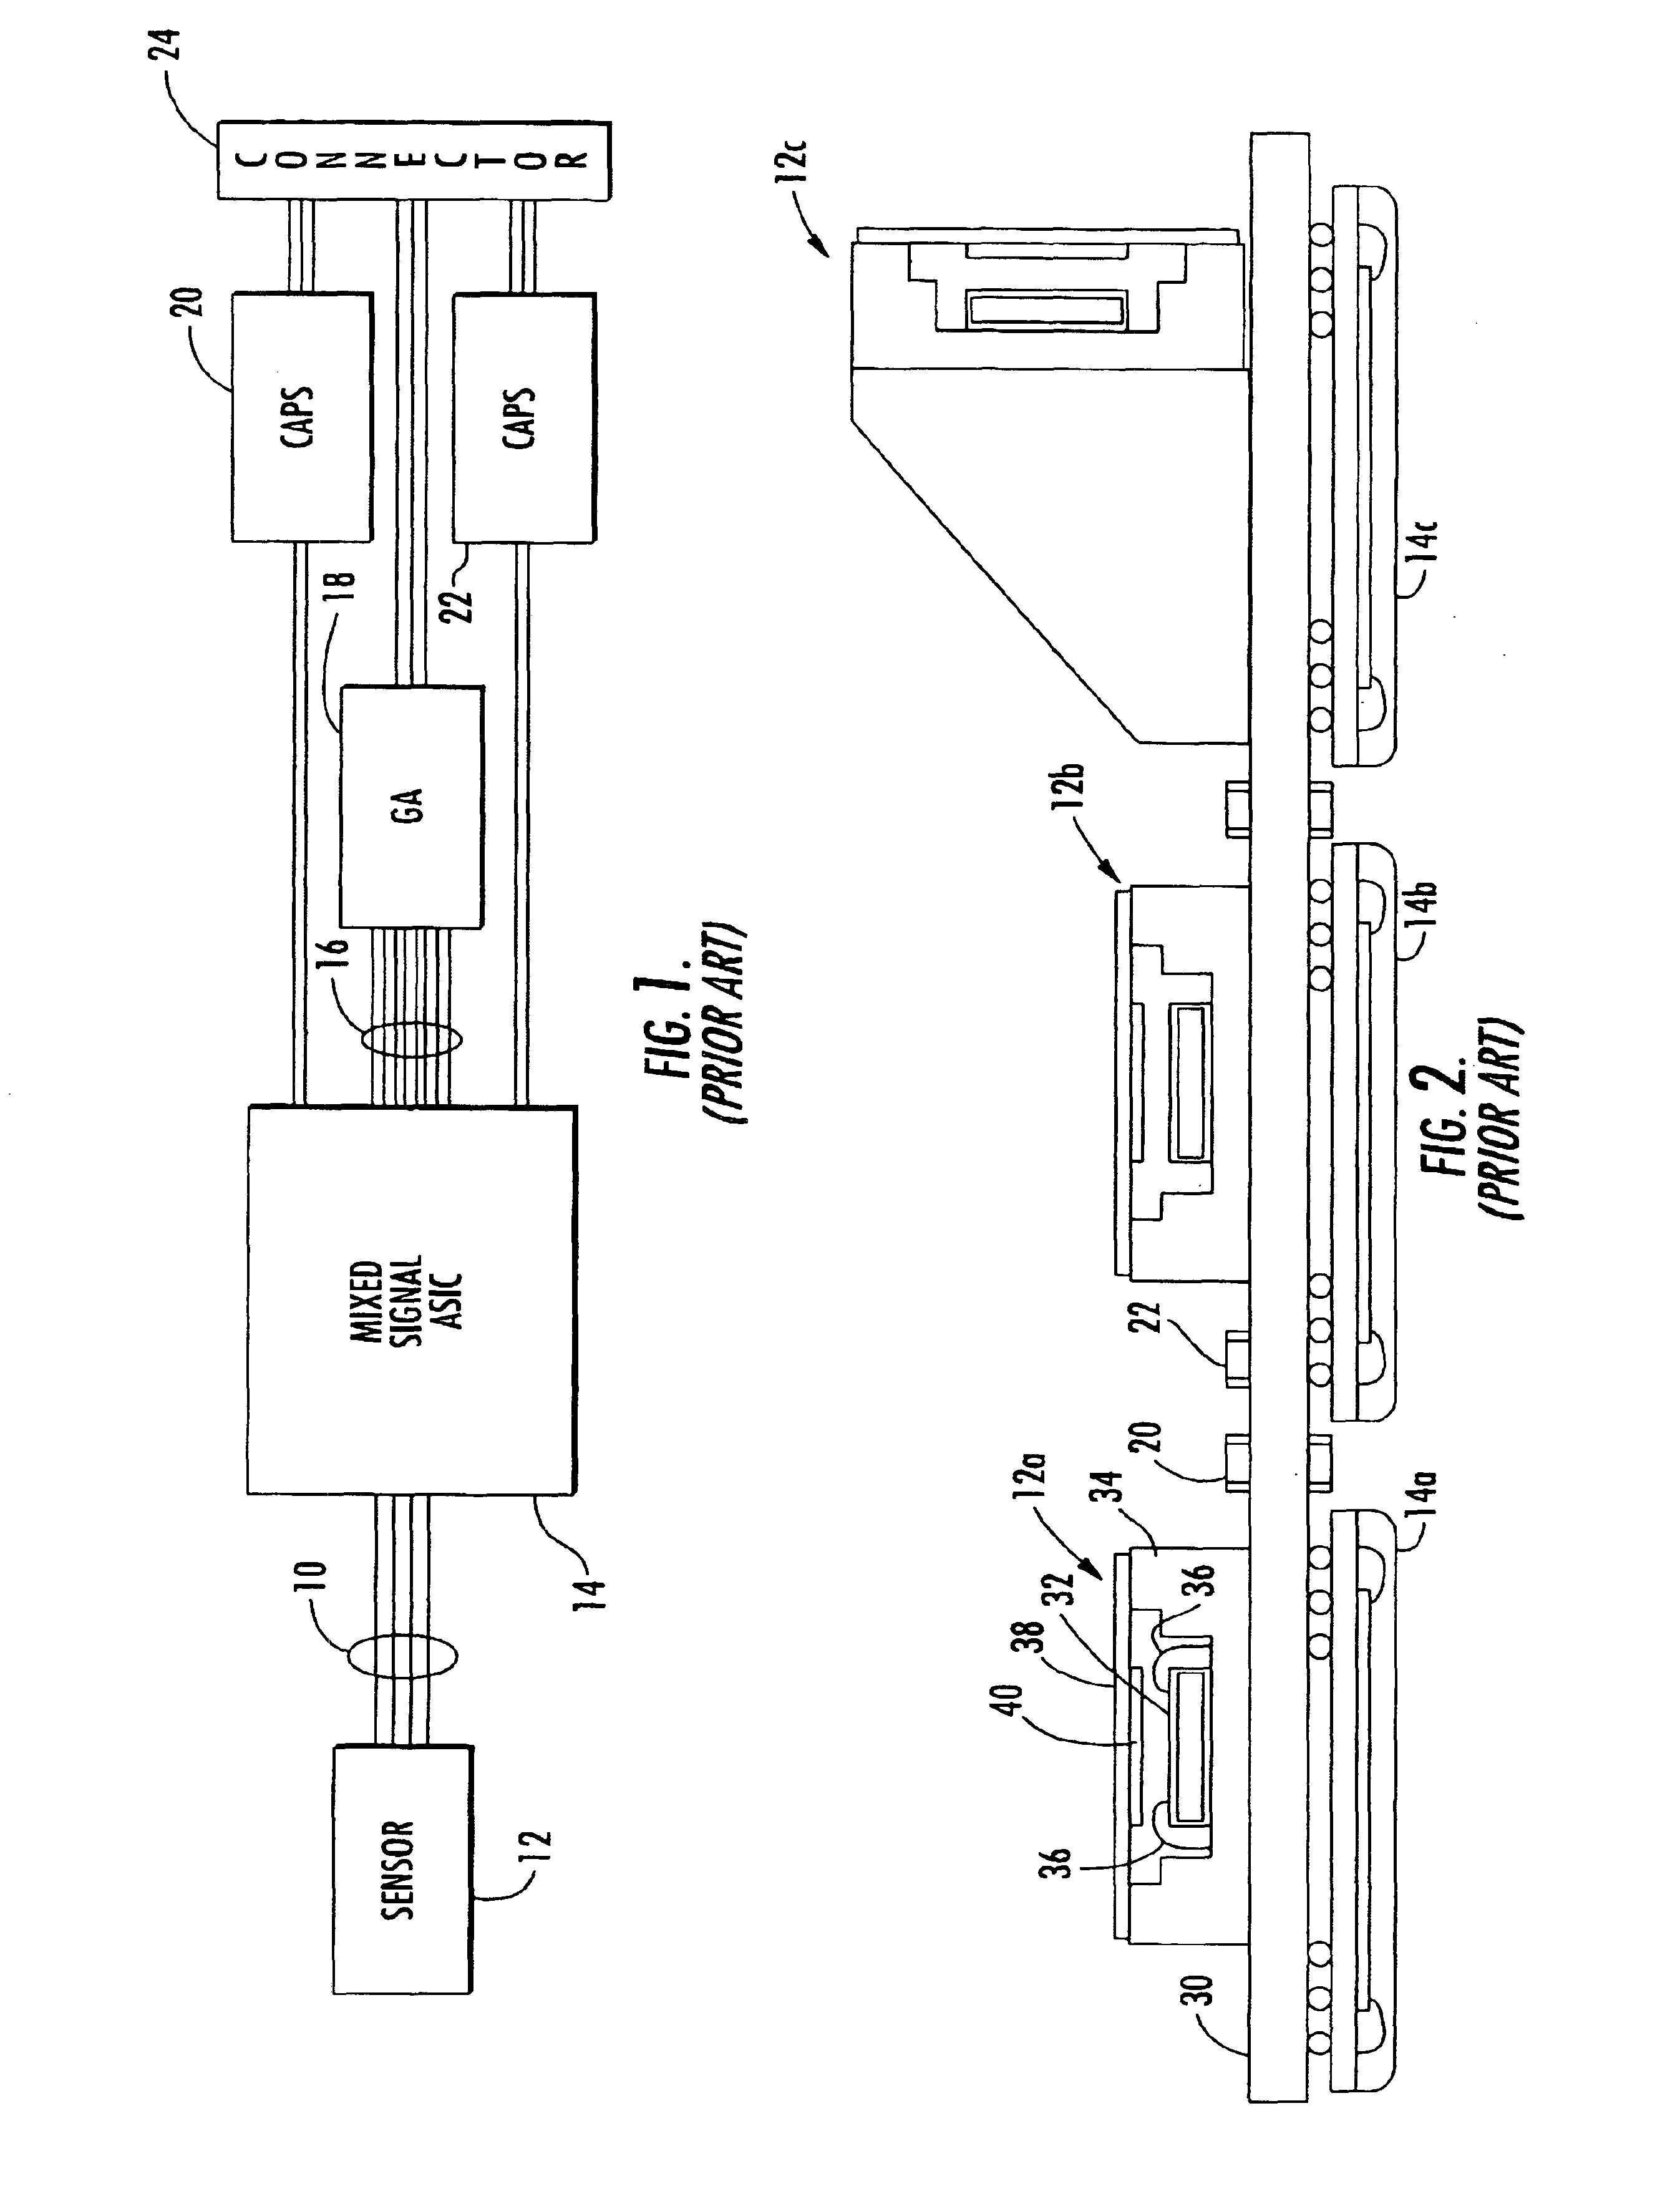 Integrated sensor and electronics package